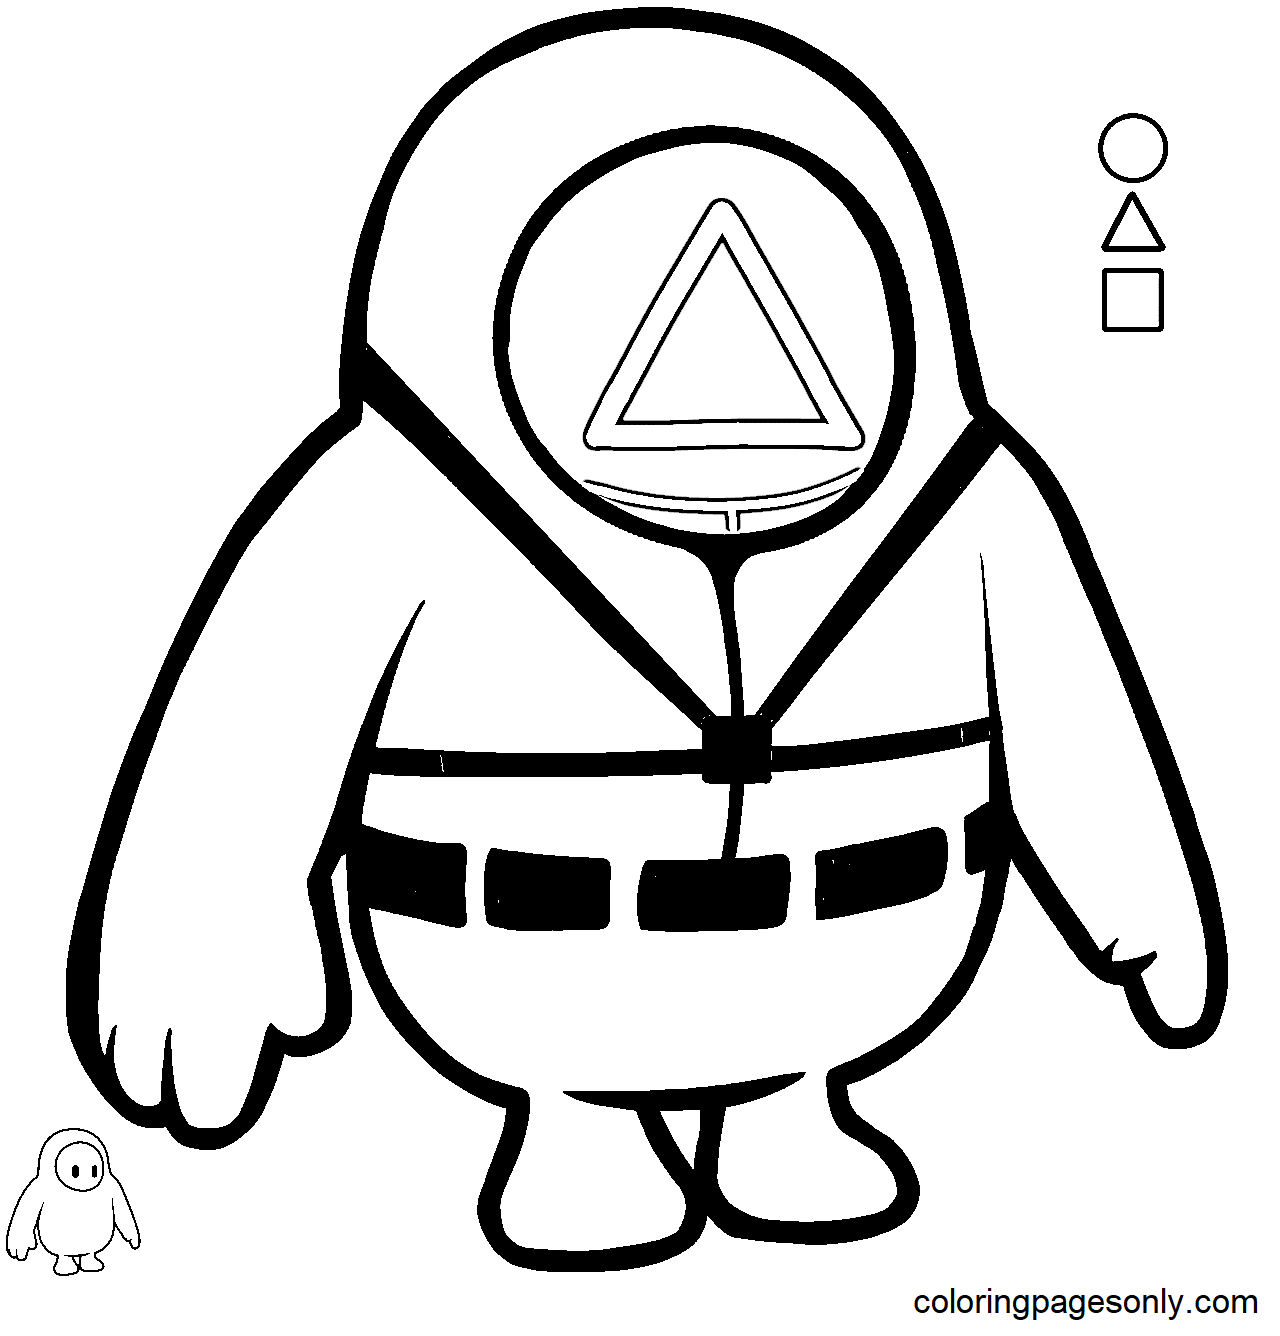 Cute Squid Game Triangle Guard Coloring Page